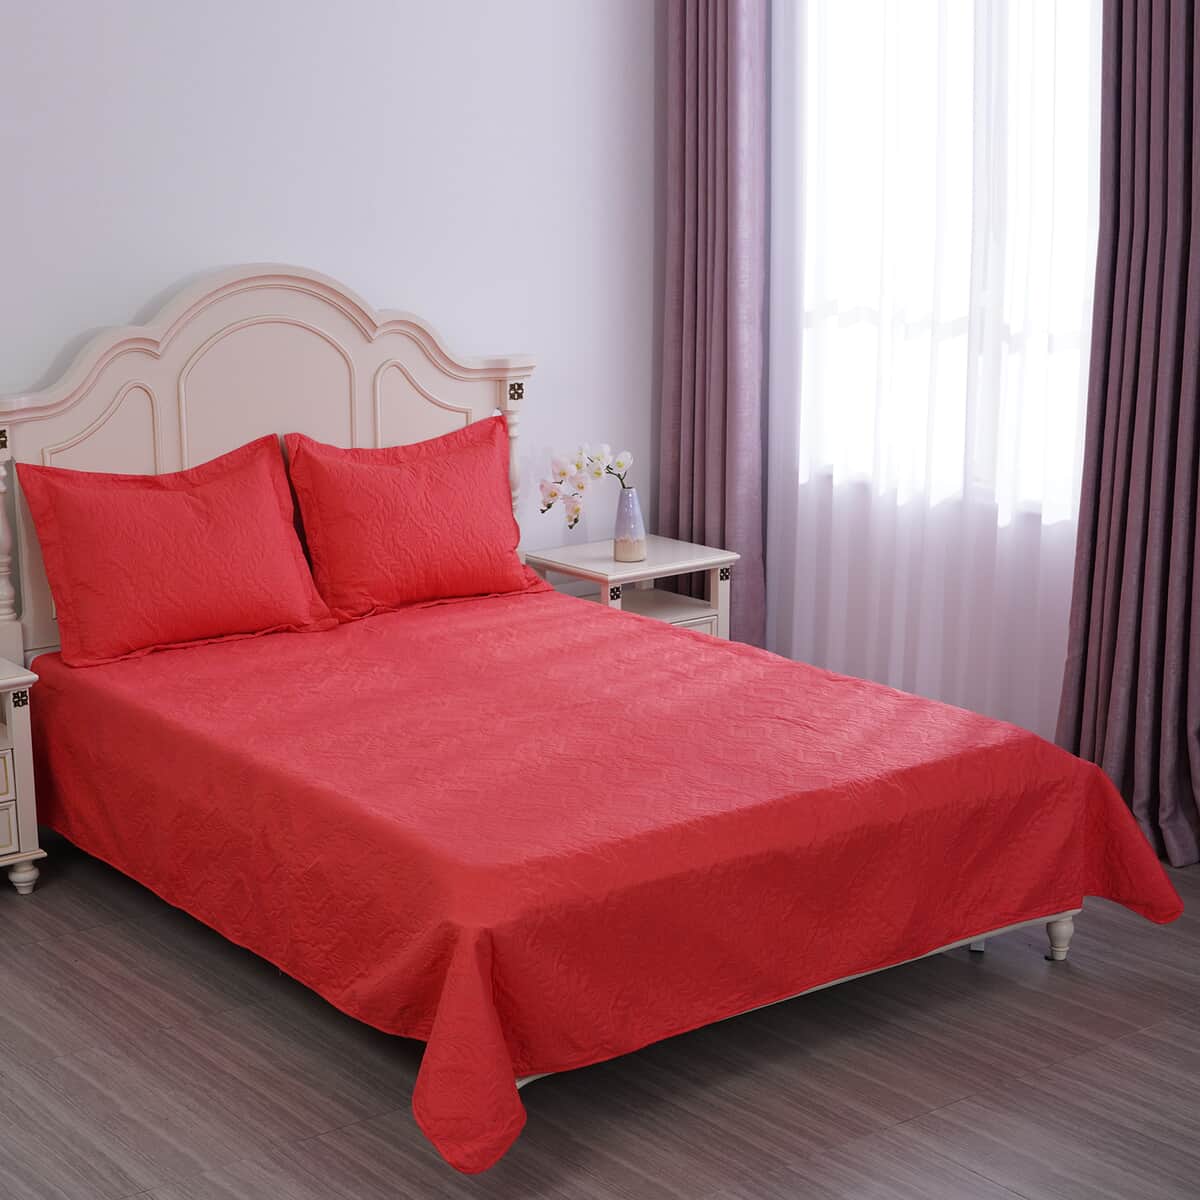 Homesmart 3 Pcs Solid Red Pinsonic Quilt Bedding Set - King Size image number 0